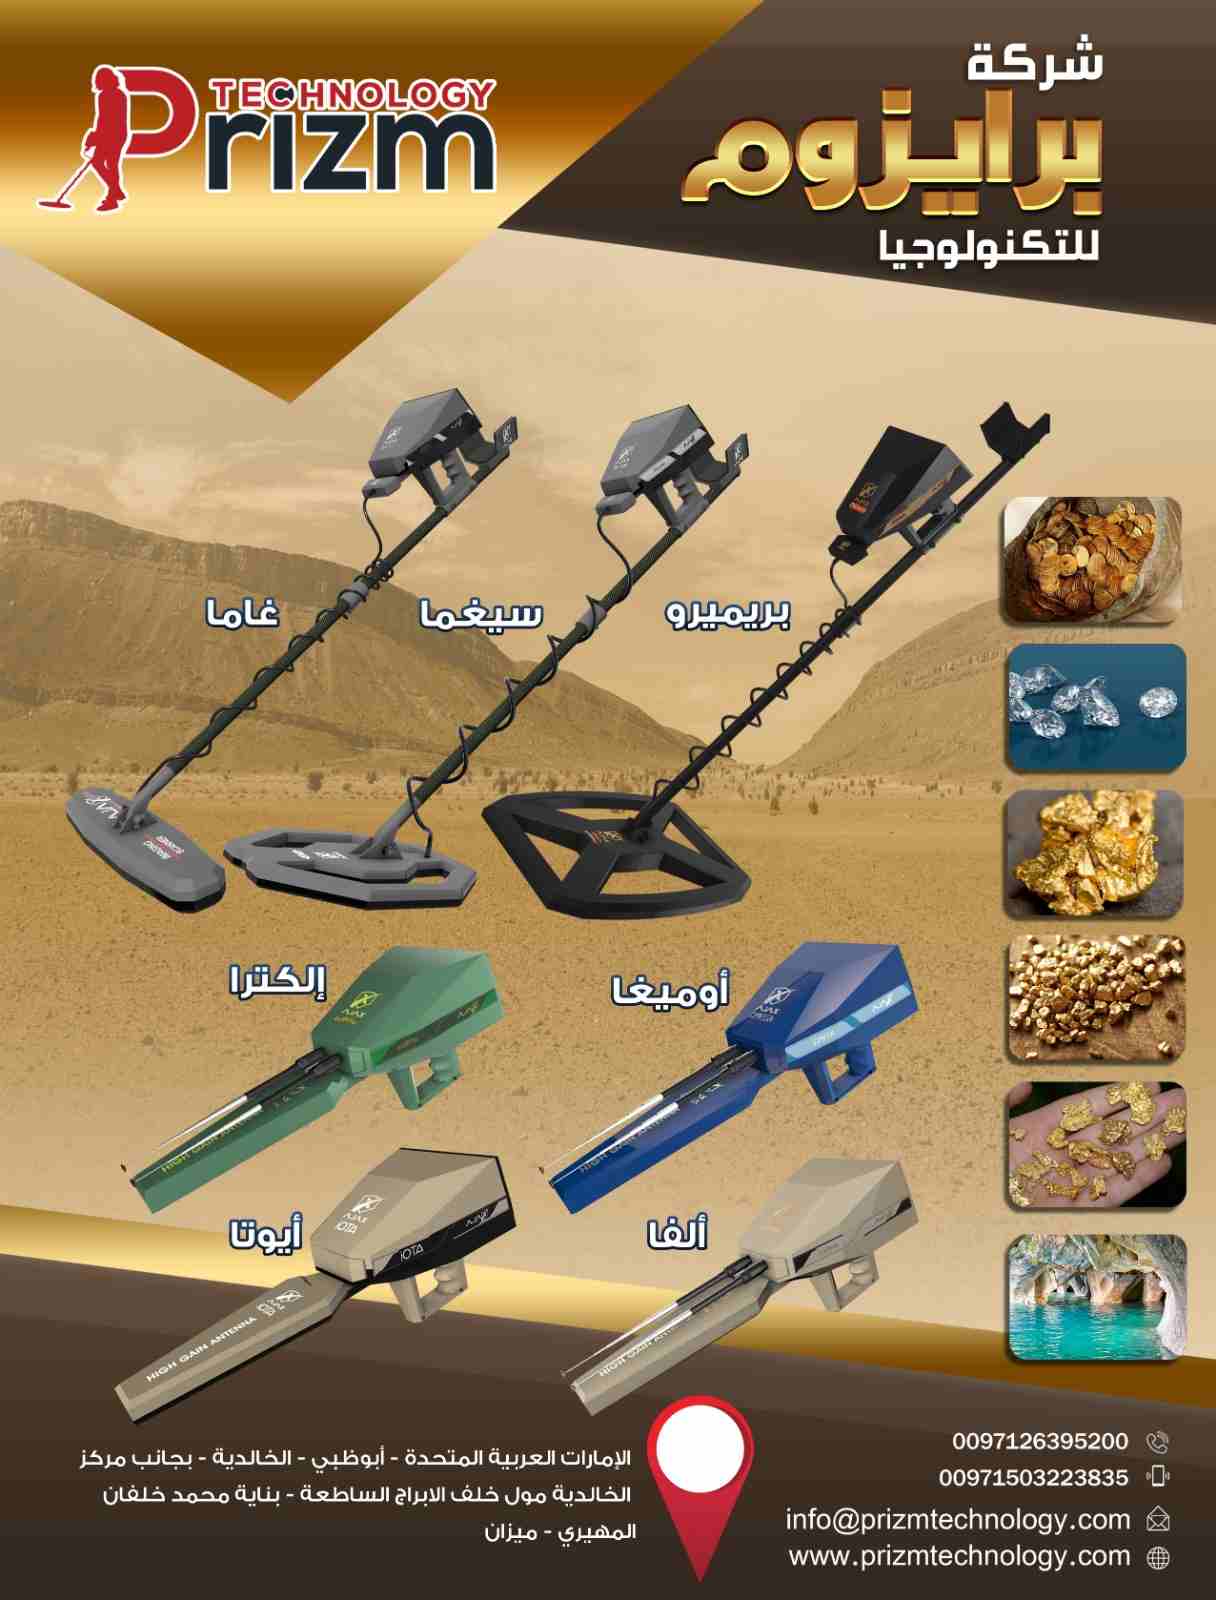 Assalaamu Alaikkum Brother,Sister All products are brand new, unlocked sealed in box comes with 1 year international warranty and also 6 months return policy - -  اجهزة كشف الذهب والمعادن...